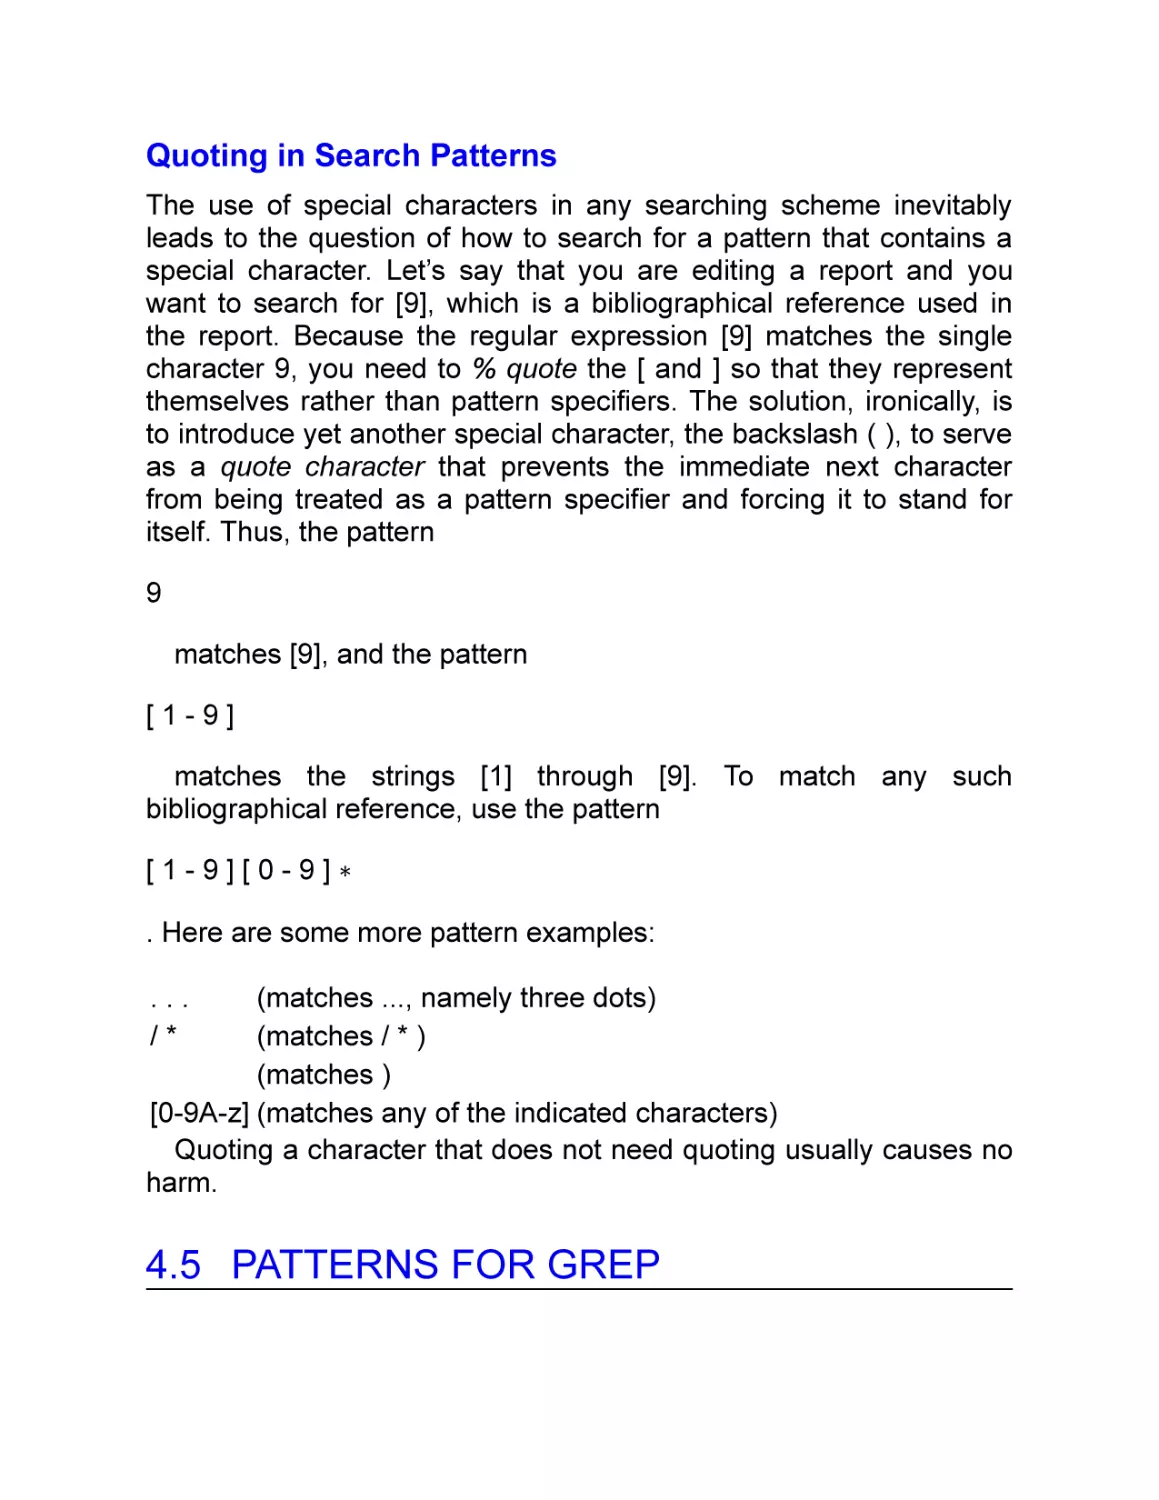 Quoting in Search Patterns
4.5 Patterns for grep